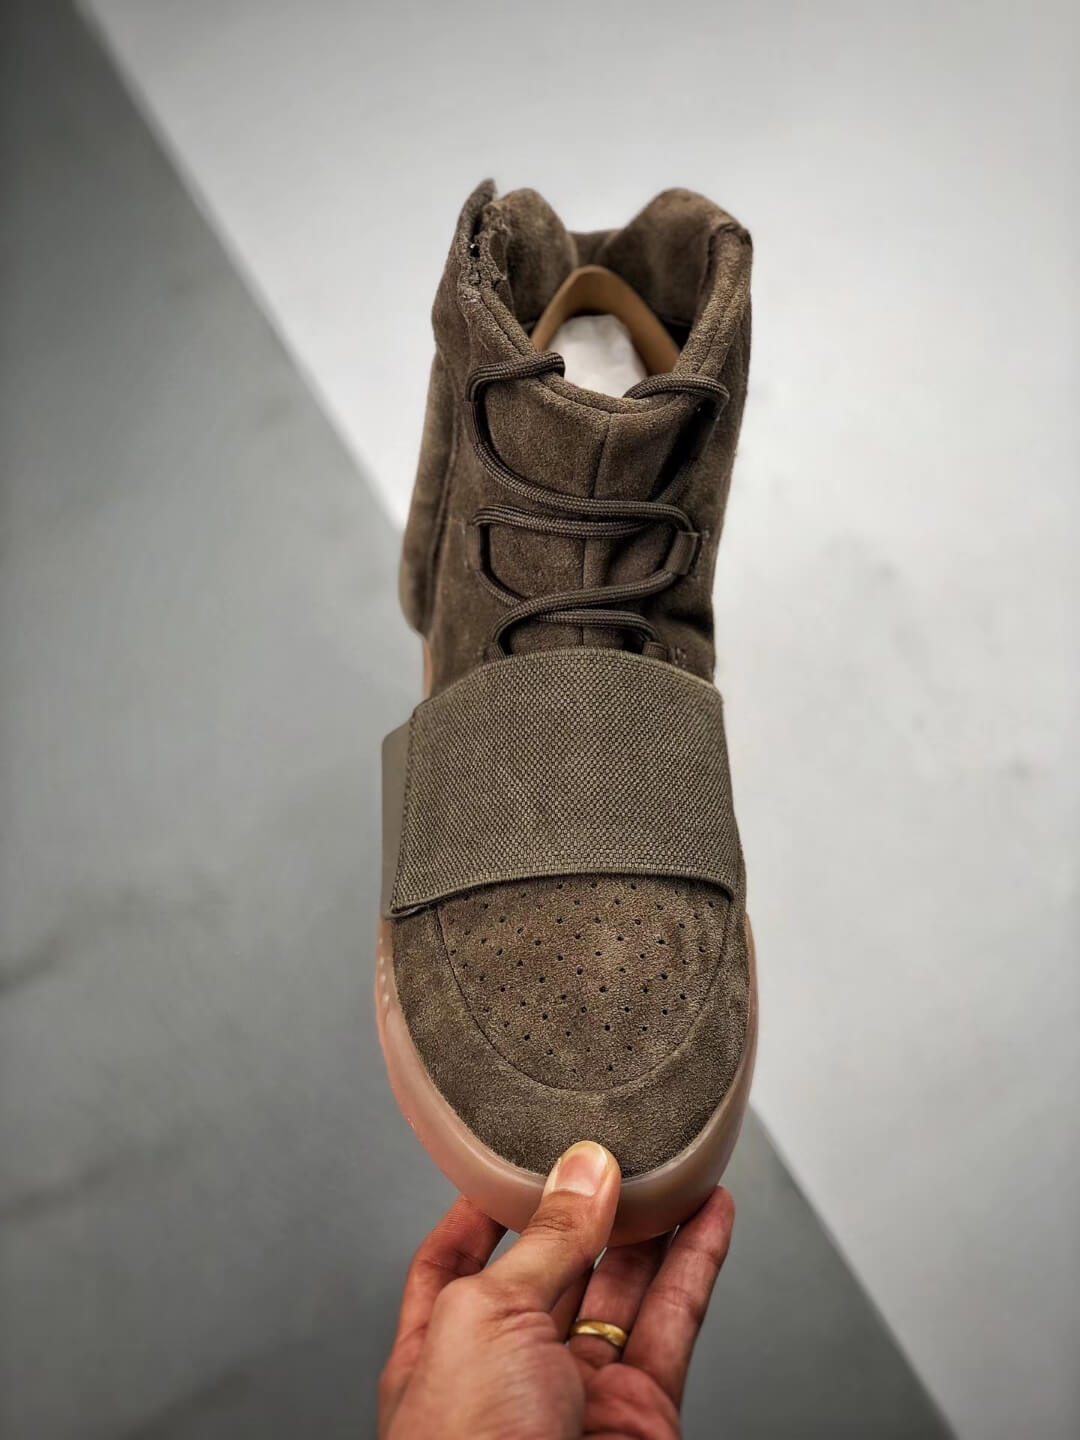 The Yeezy Boost 750 'Chocolate' Sneaker 